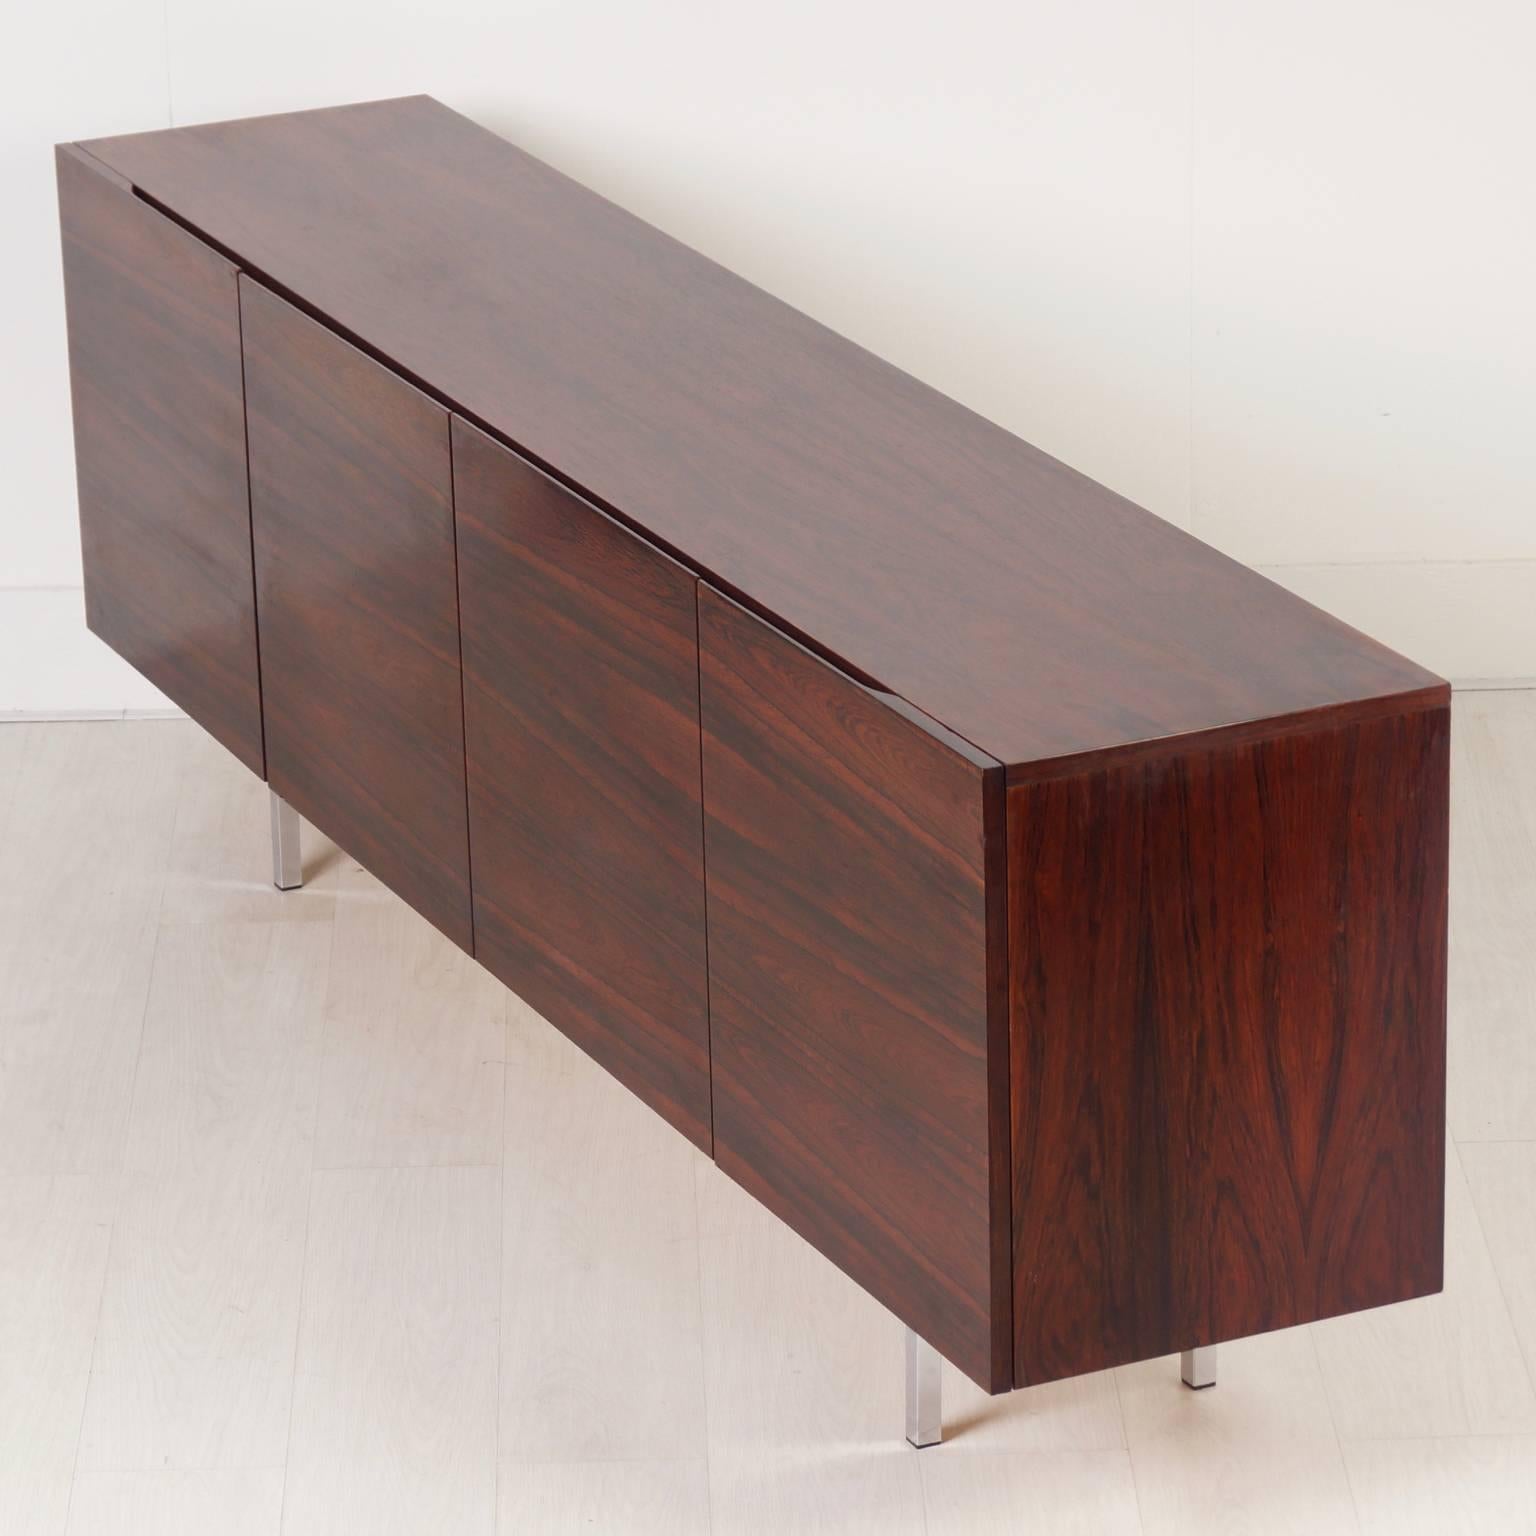 Fristho sideboard designed by Rudolf Bernd Glatzel for Fristho in 1962. This Fristho model from the G Series is made of Rio Rosewood with a very Fine wood grain structure (see photos). This sideboard is made very beautiful and quite rare. In the